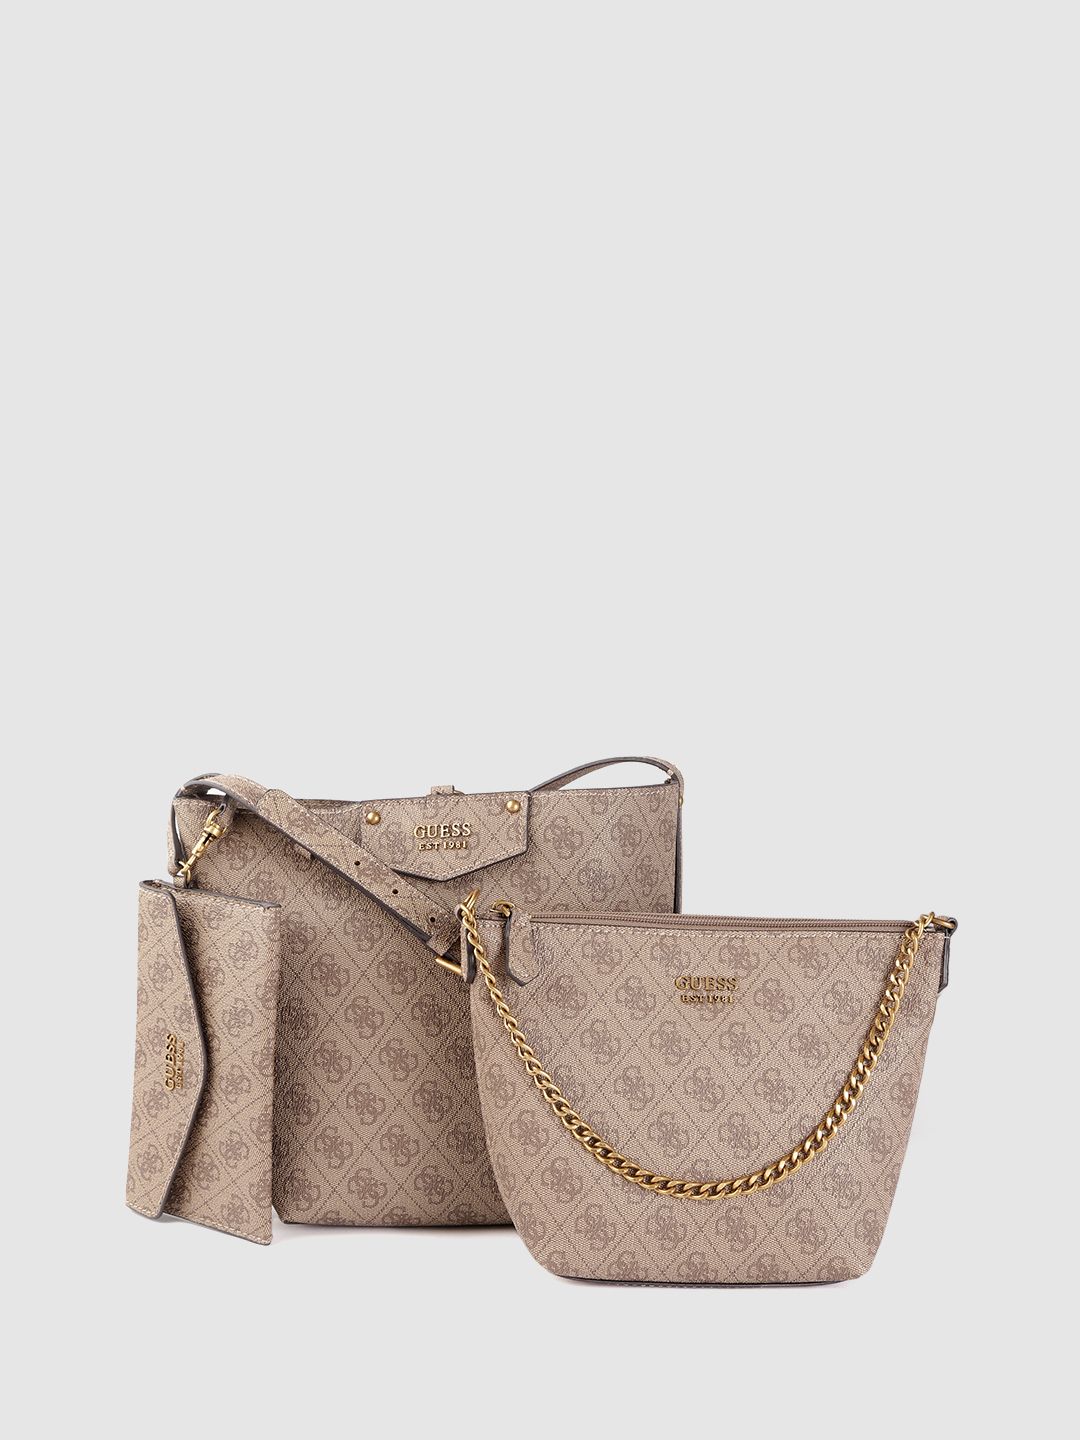 GUESS Beige Printed PU Structured Sling Bag Price in India